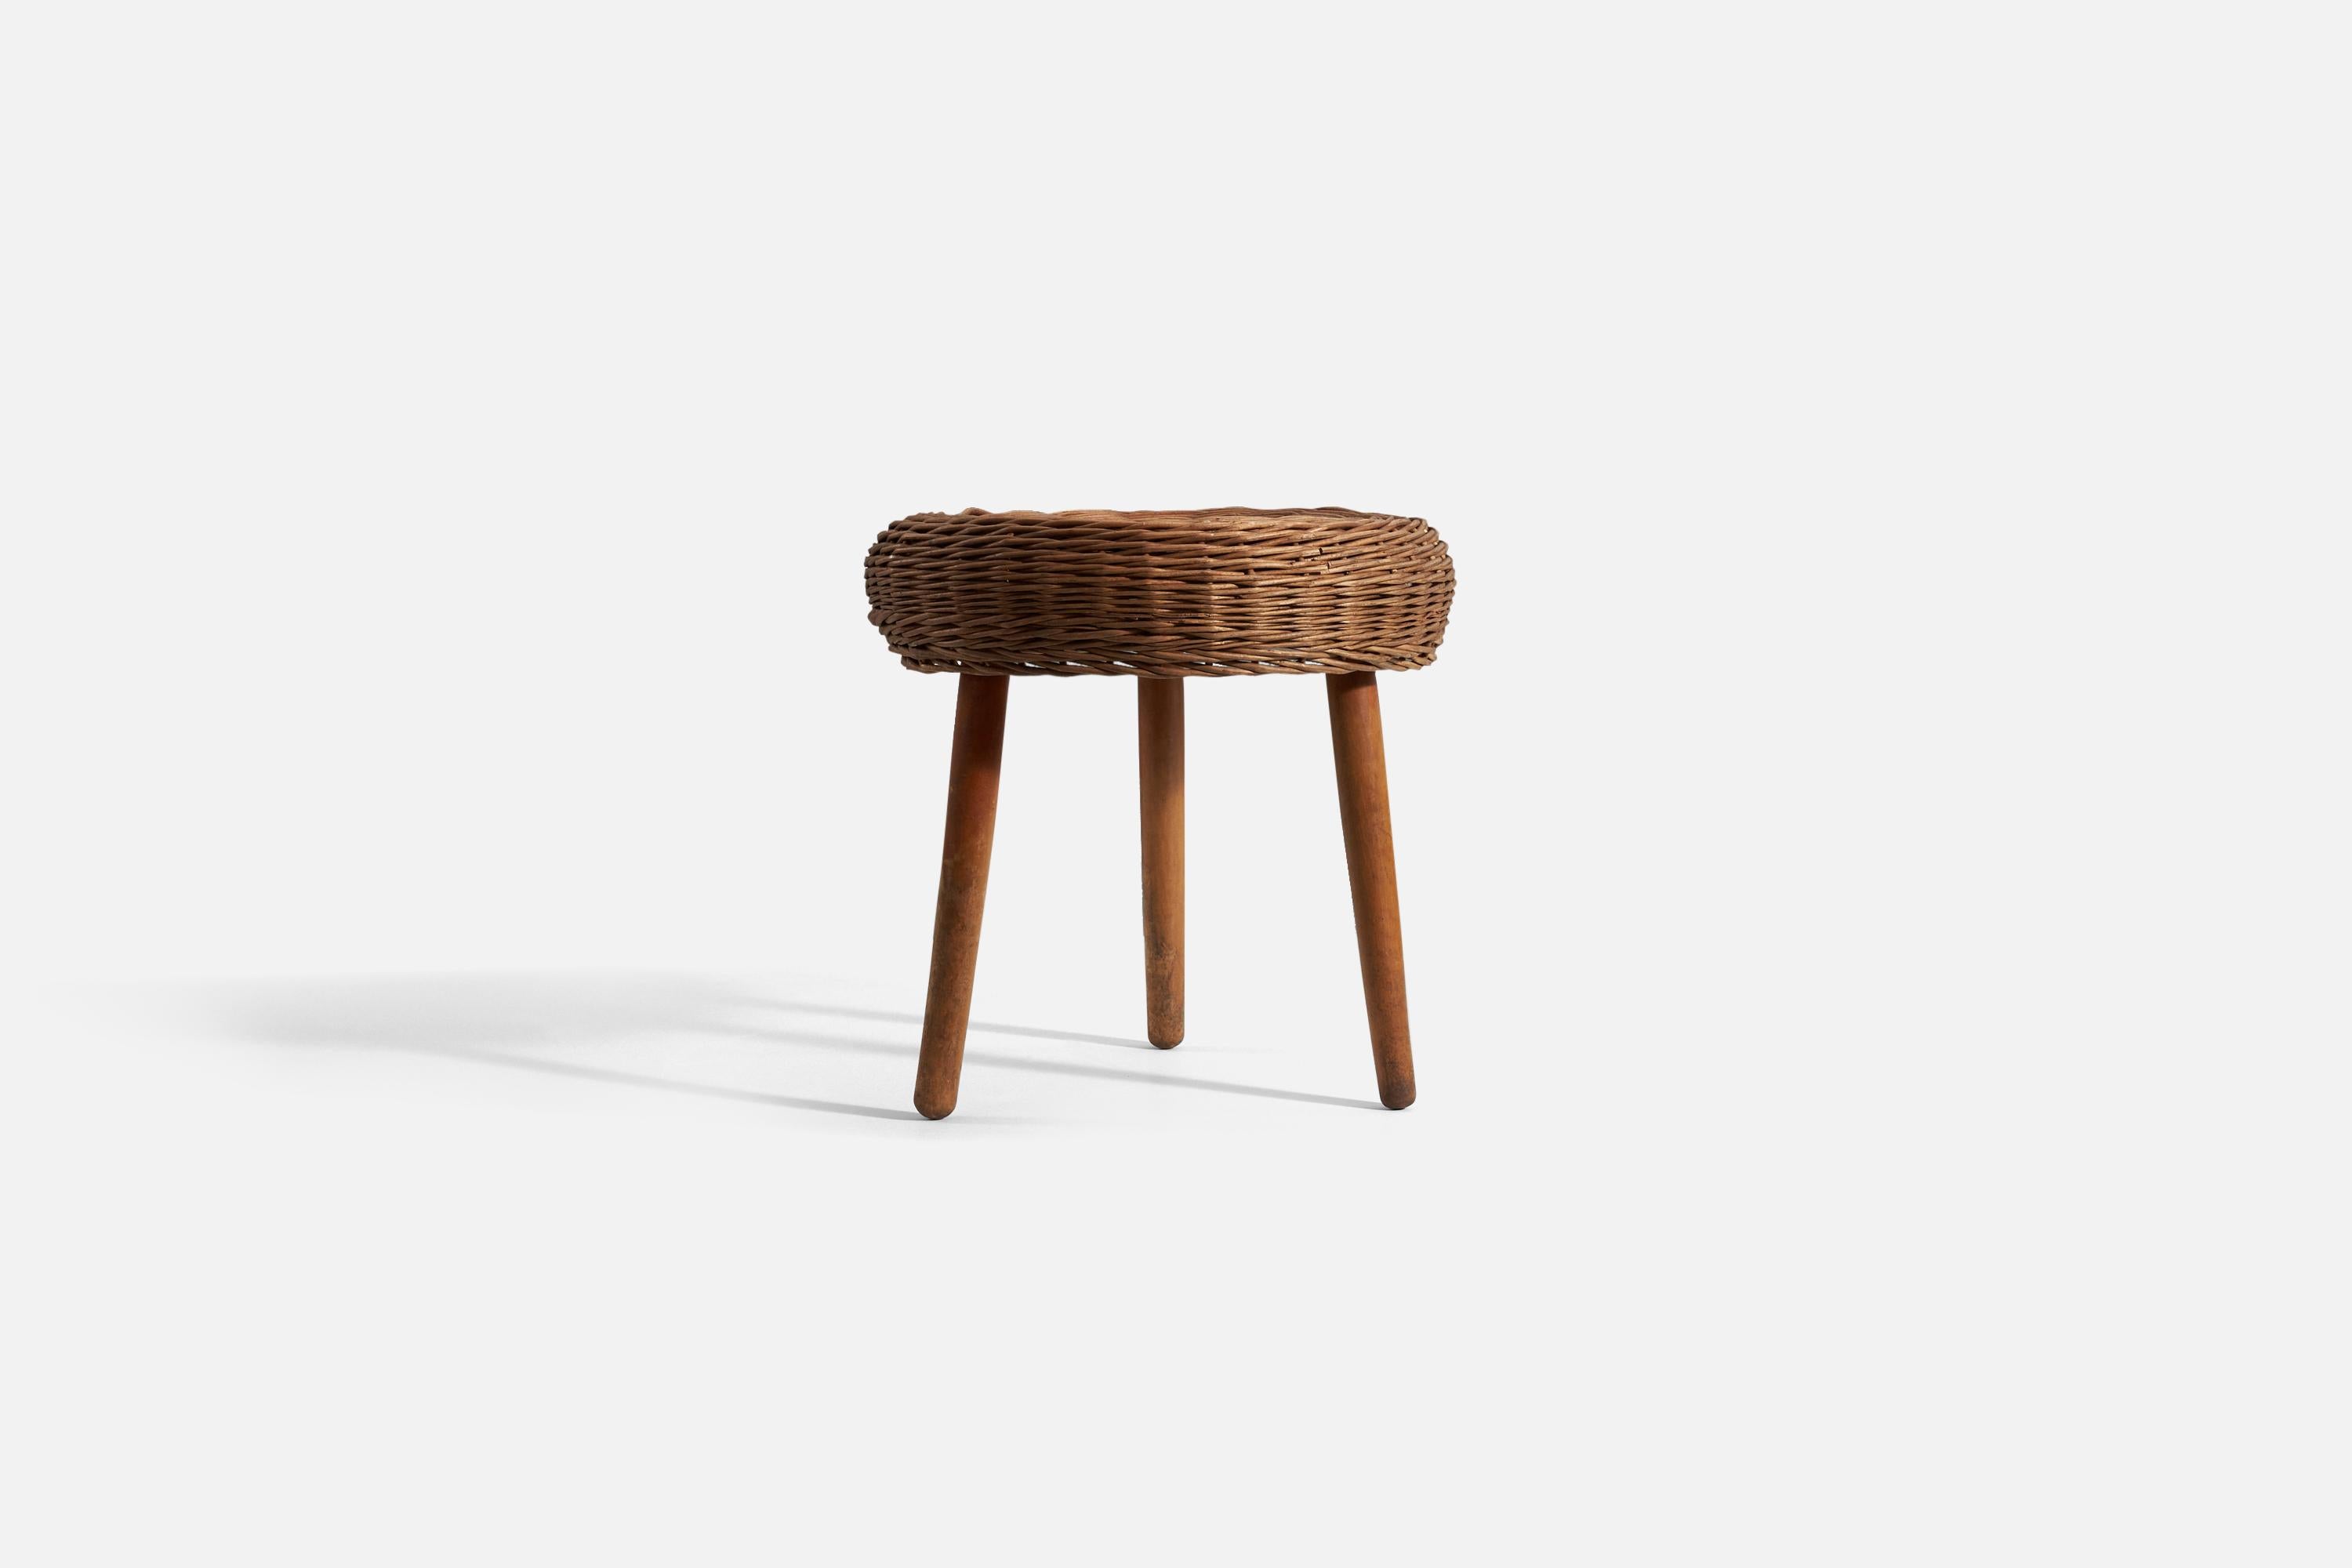 American Tony Paul 'Attributed' Stool, Wicker, Wood, United States, 1950s For Sale